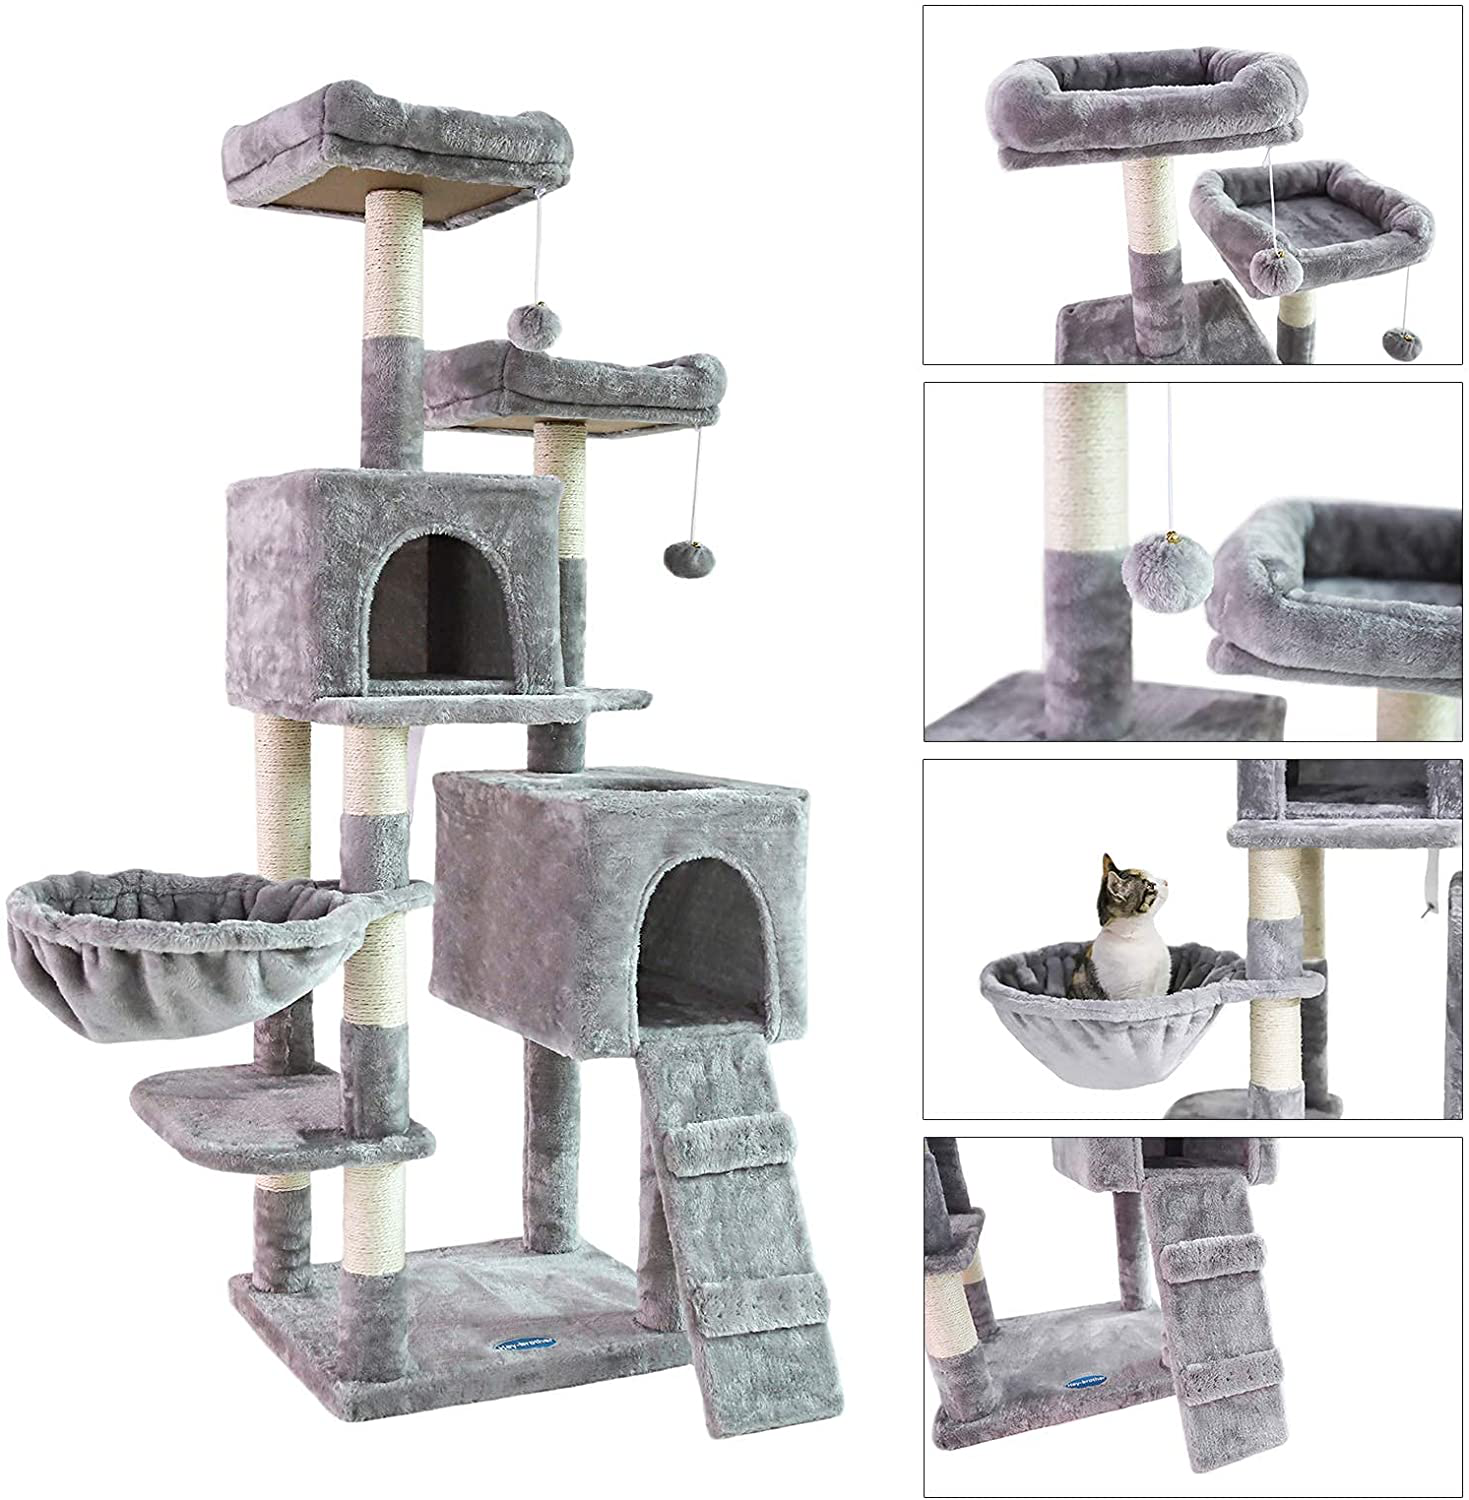 Hey-Brother 58'' Multi-Level Cat Tree Condo Furniture with Sisal-Covered Scratching Posts, 2 Plush Condos, Hammock for Kittens, Cats and Pets